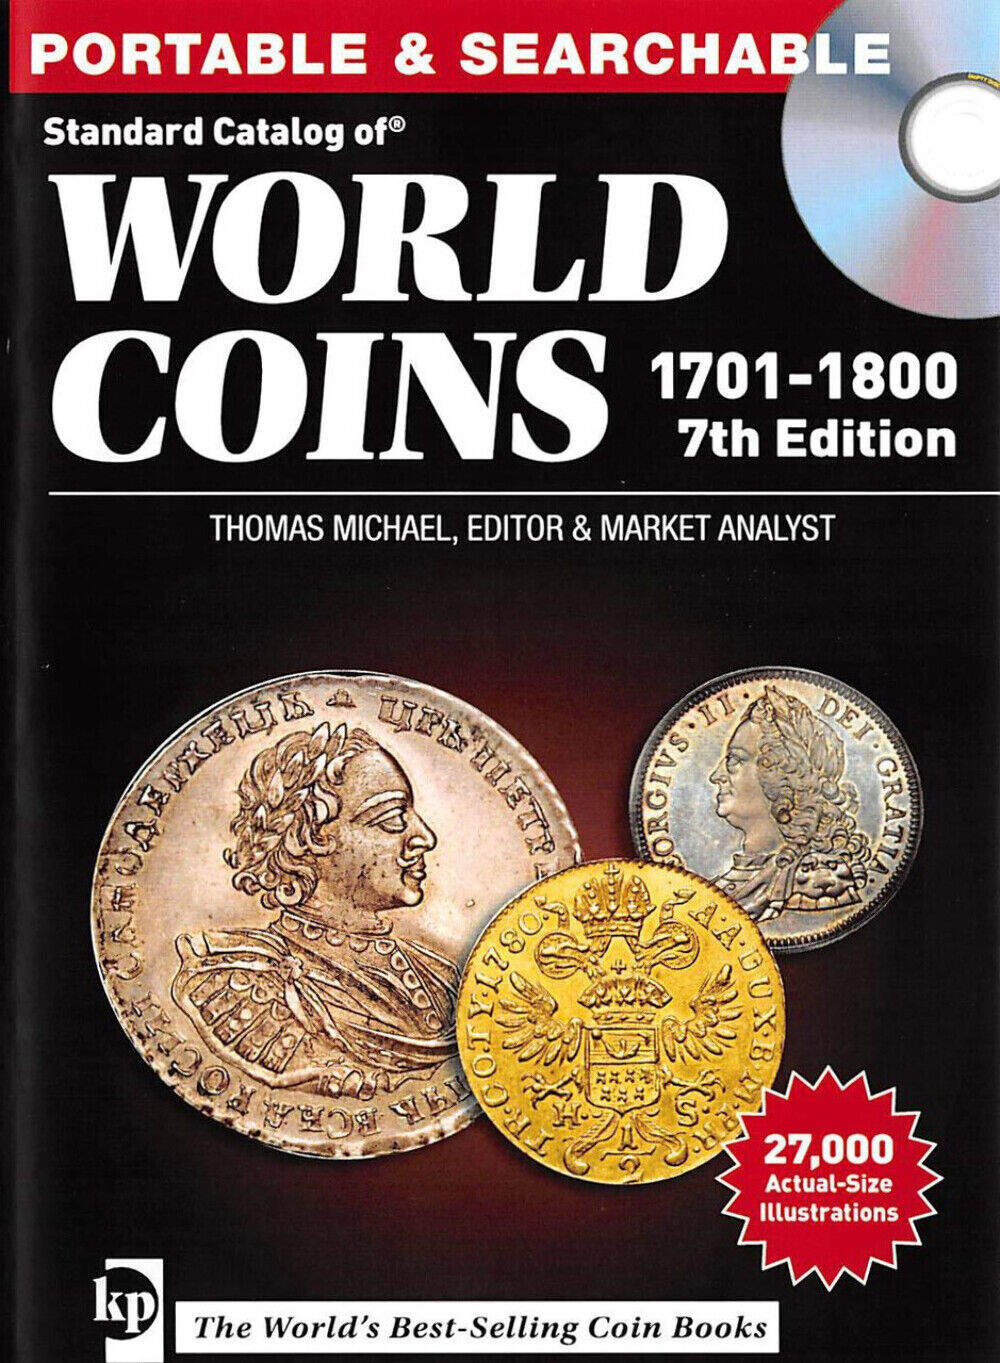 Standard Catalog of World Coins 1701-1800 CD 7th Edition